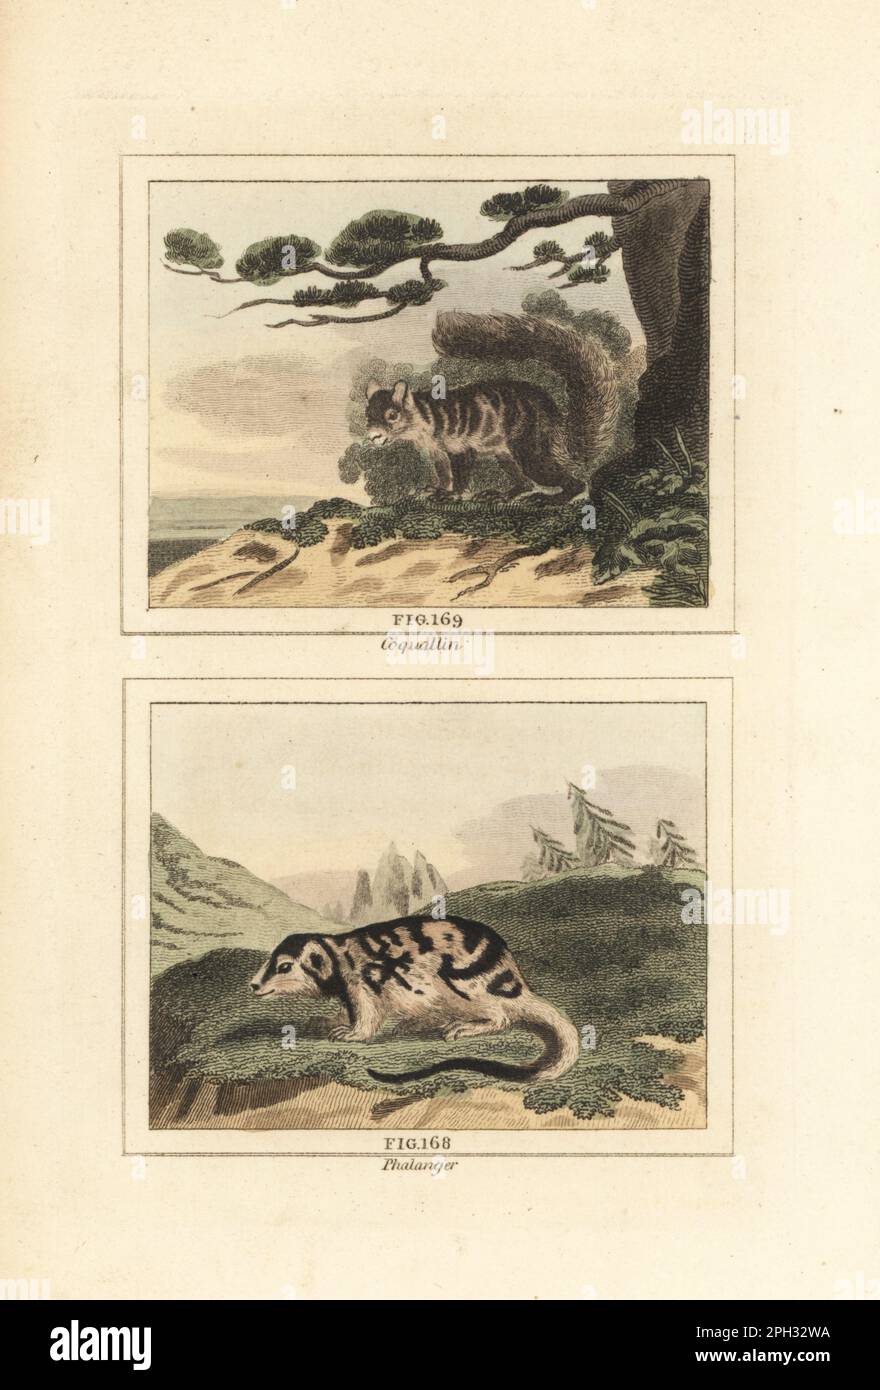 Variegated squirrel, Sciurus variegatoides 167, and common spotted cuscus,  Spilocuscus maculatus 168. Coquallin and phalanger. Handcoloured copperplate engraving after Jacques de Seve from James Smith Barr’s edition of Comte Buffon’s Natural History, A Theory of the Earth, General History of Man, Brute Creation, Vegetables, Minerals, T. Gillet, H. D. Symonds, Paternoster Row, London, 1807. Stock Photo